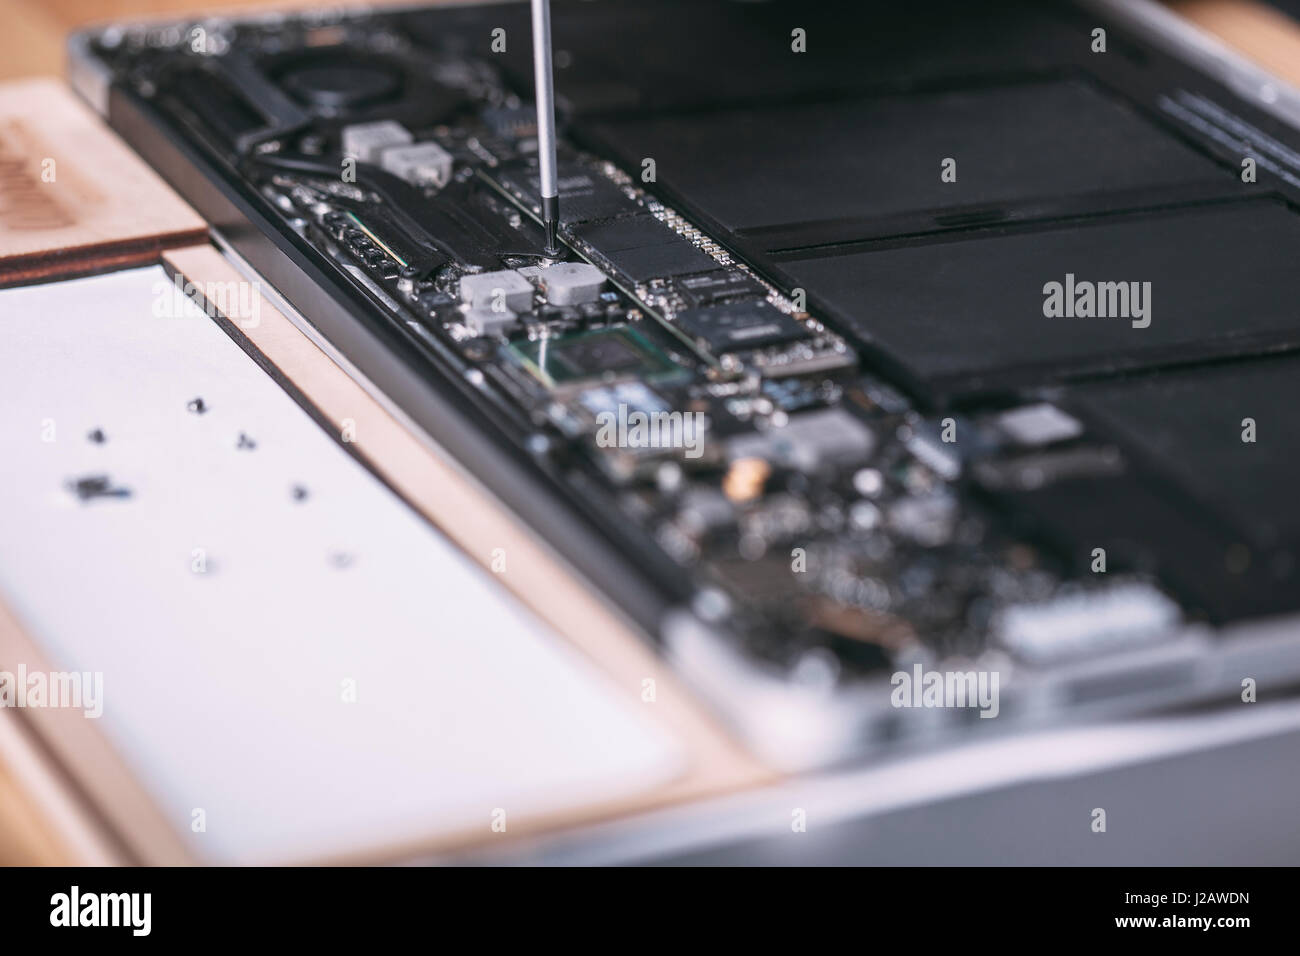 Close-up of digital tablet being repaired at electronics store Stock Photo